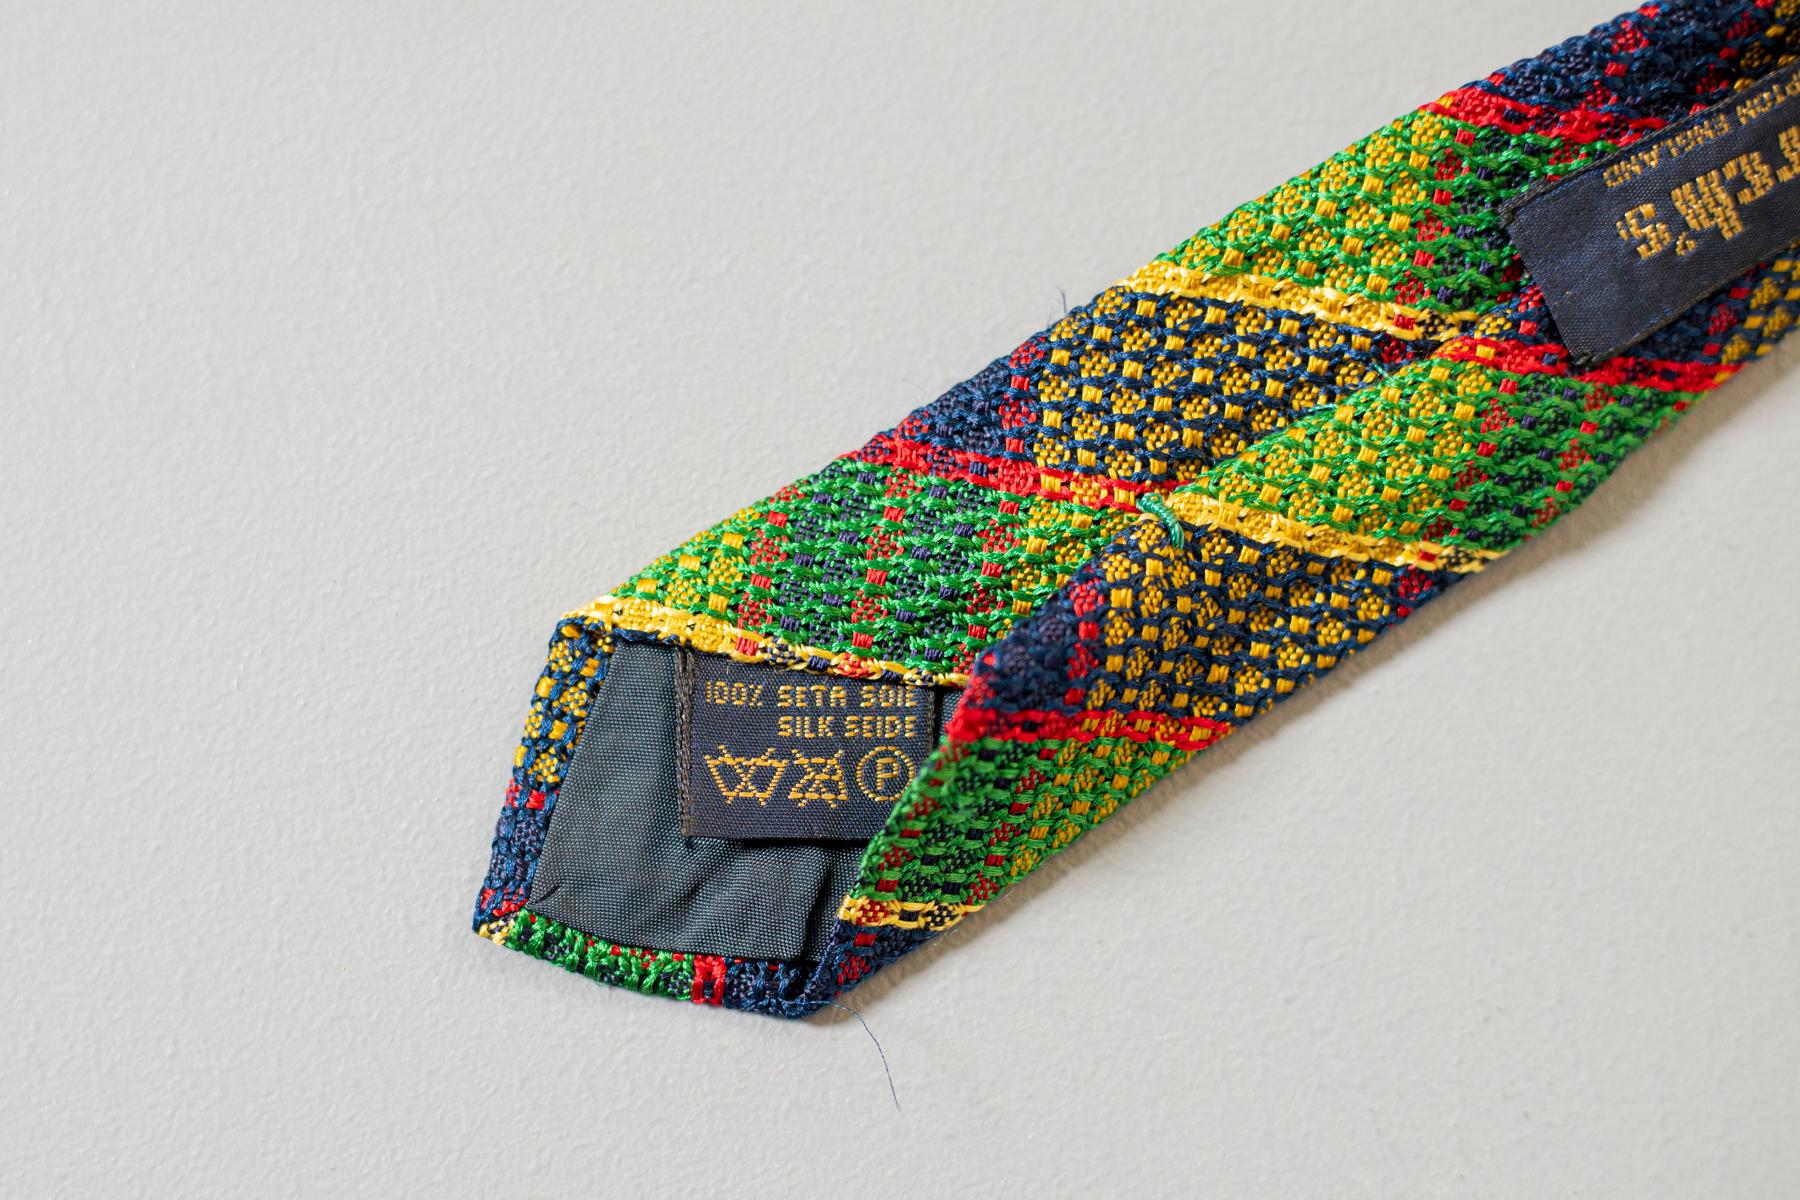 Colourful and showy, this tie displays a jacquard plaid motif in green, red, yellow, and blue. Designed by Church’s and made in Northampton England, this is a fine piece of clothing. This tie is the combination between classical and eccentric style,